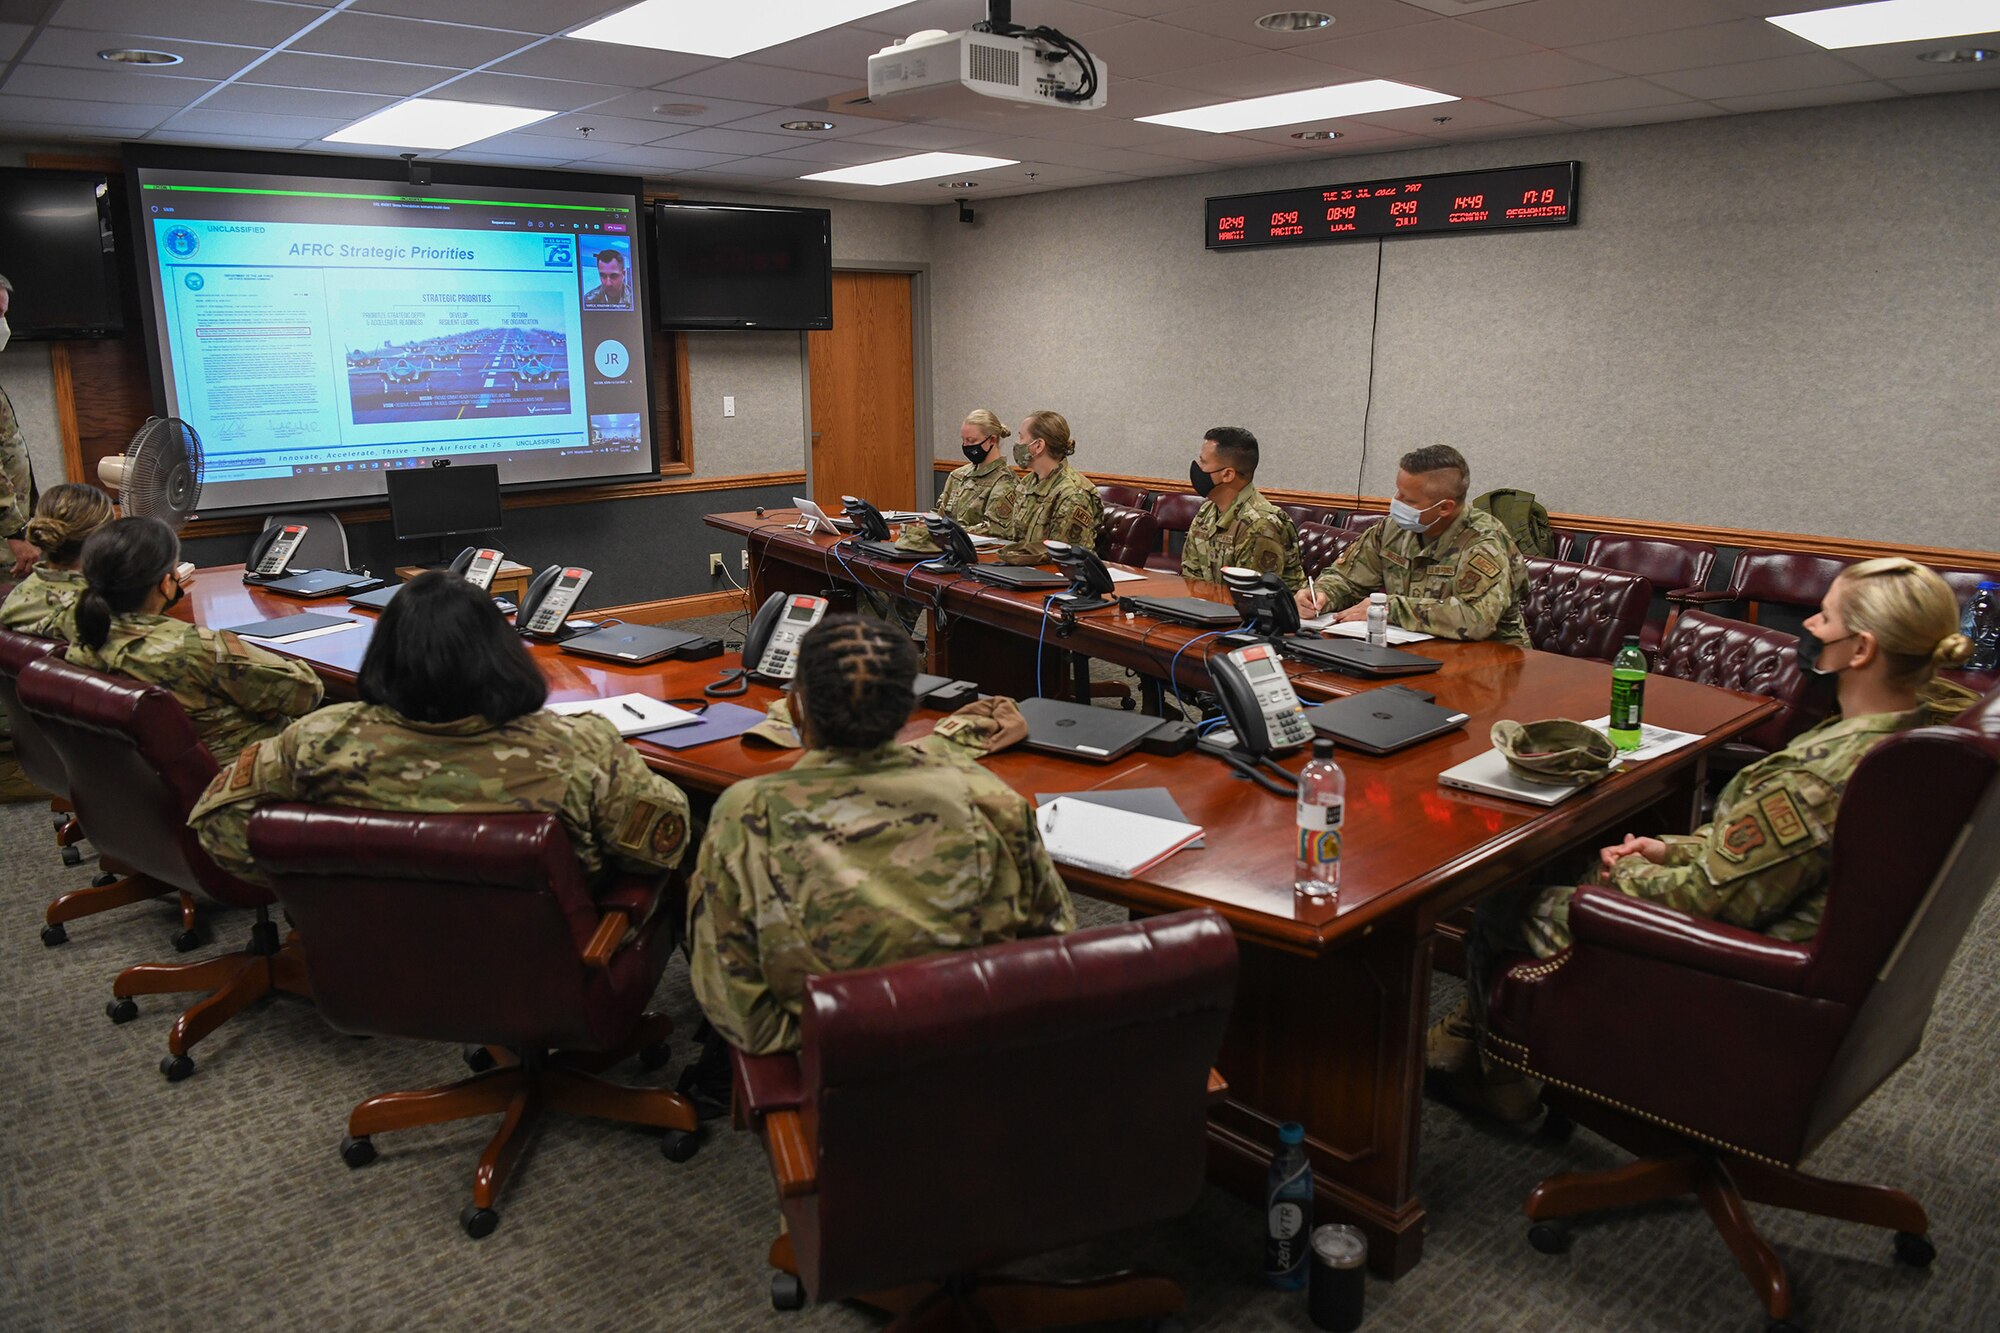 Air Force Reserve Command Developing Resilient Leaders 4N0 workshop attendees participate in a Microsoft TEAMS discussion with Chief Master Sgt. Jonathan Rapelje, Developing Resilient Leaders, SEL, July 26, 2022. The chief gave an overview of the program, its intent and history.